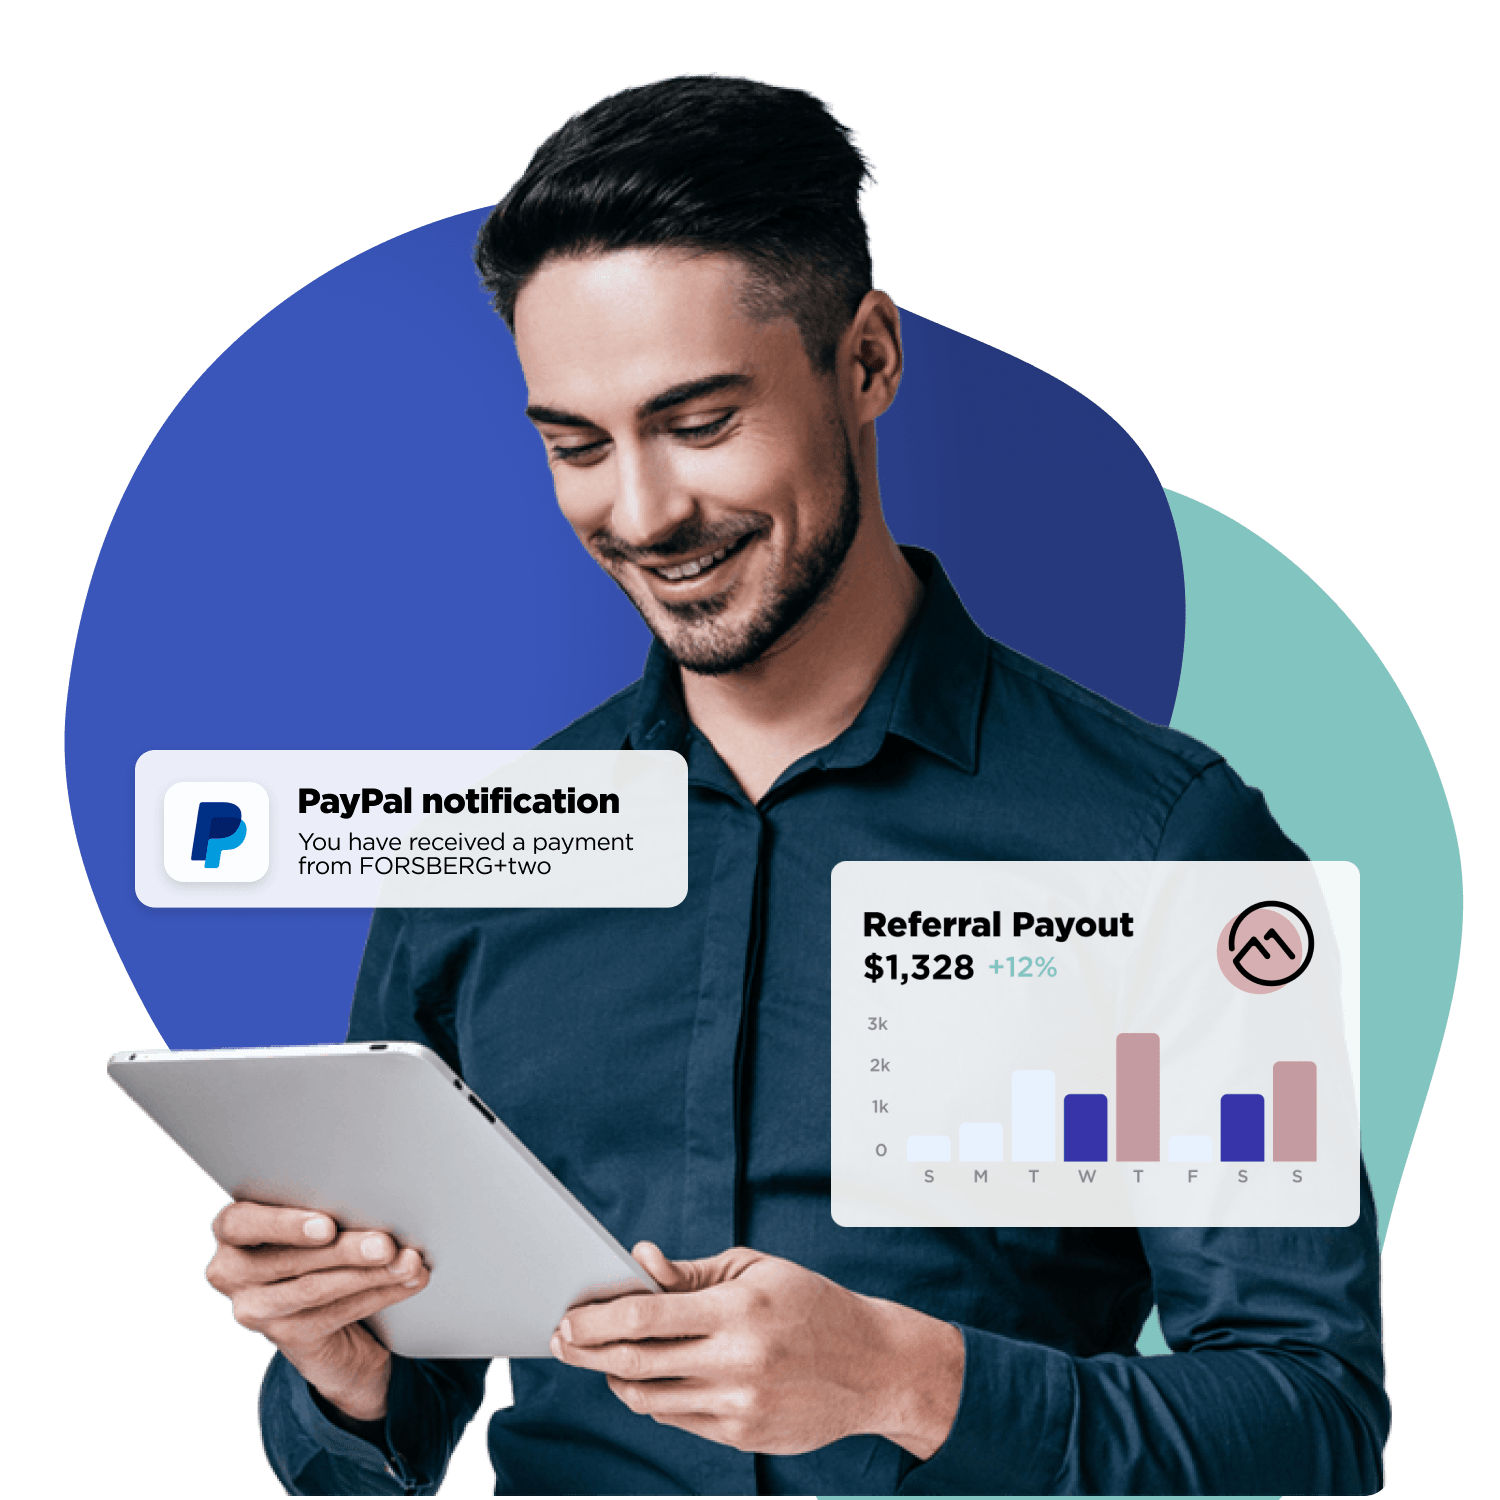 Man with tablet smiling. Two elements in the front showing a paypal icon and a graph going up